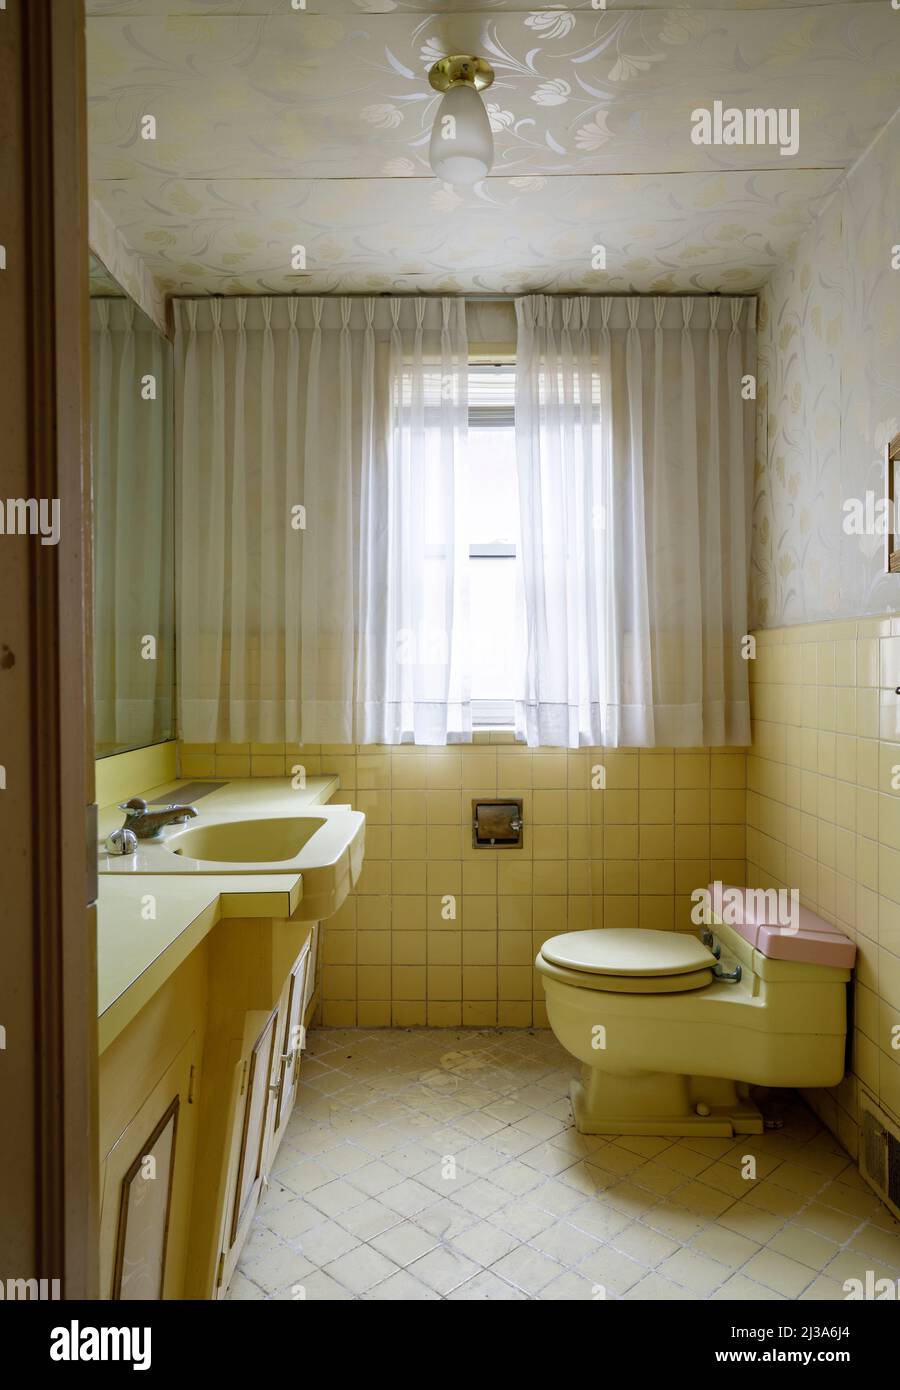 A retro bathroom from the 1960s or 1970s with a yellow theme. This house has since been demolished. Stock Photo